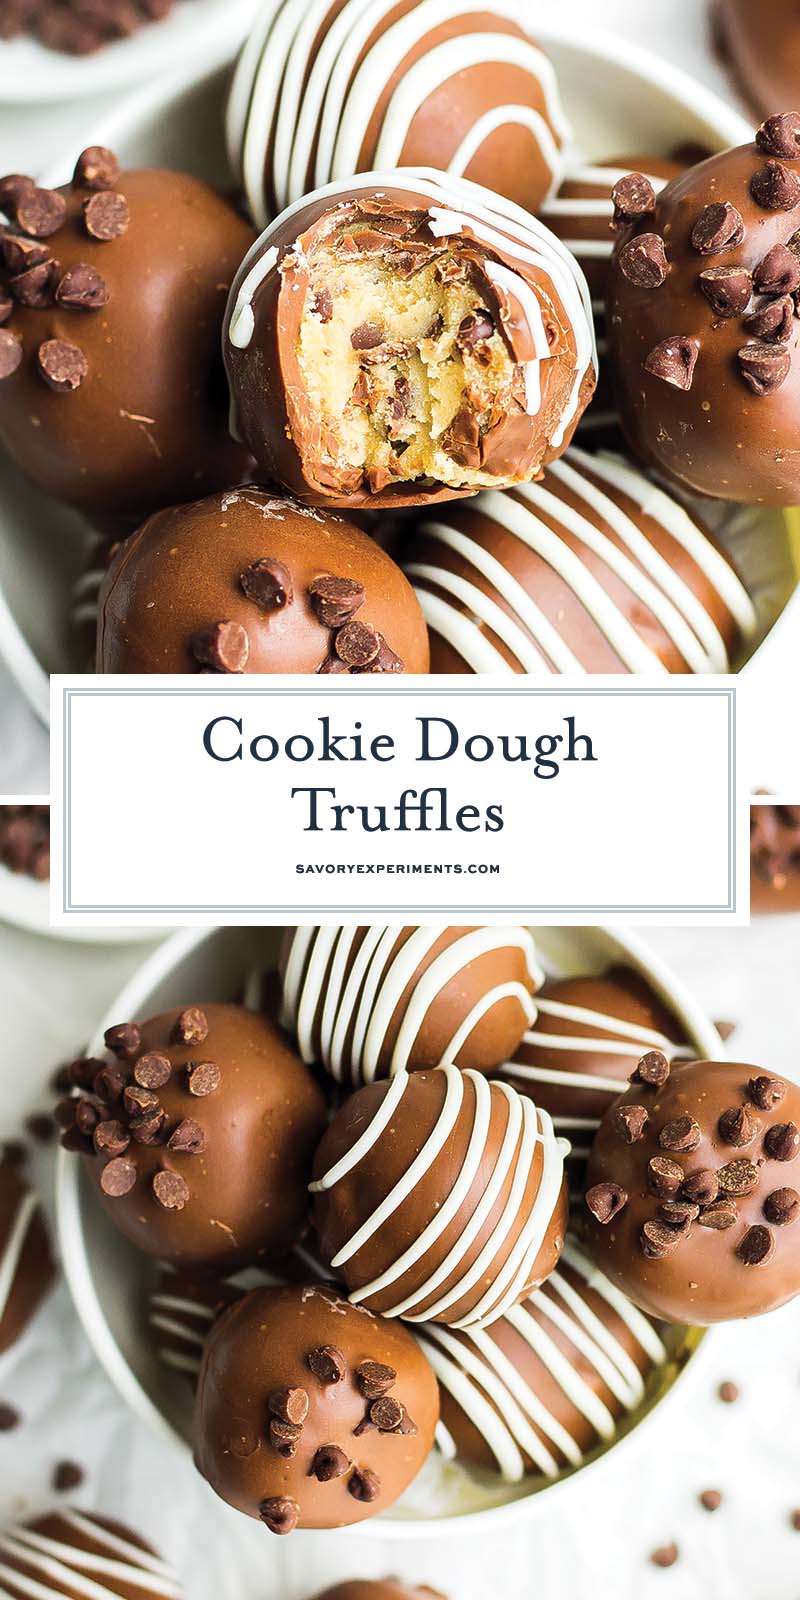 collage of cookie dough truffle images with text overlay